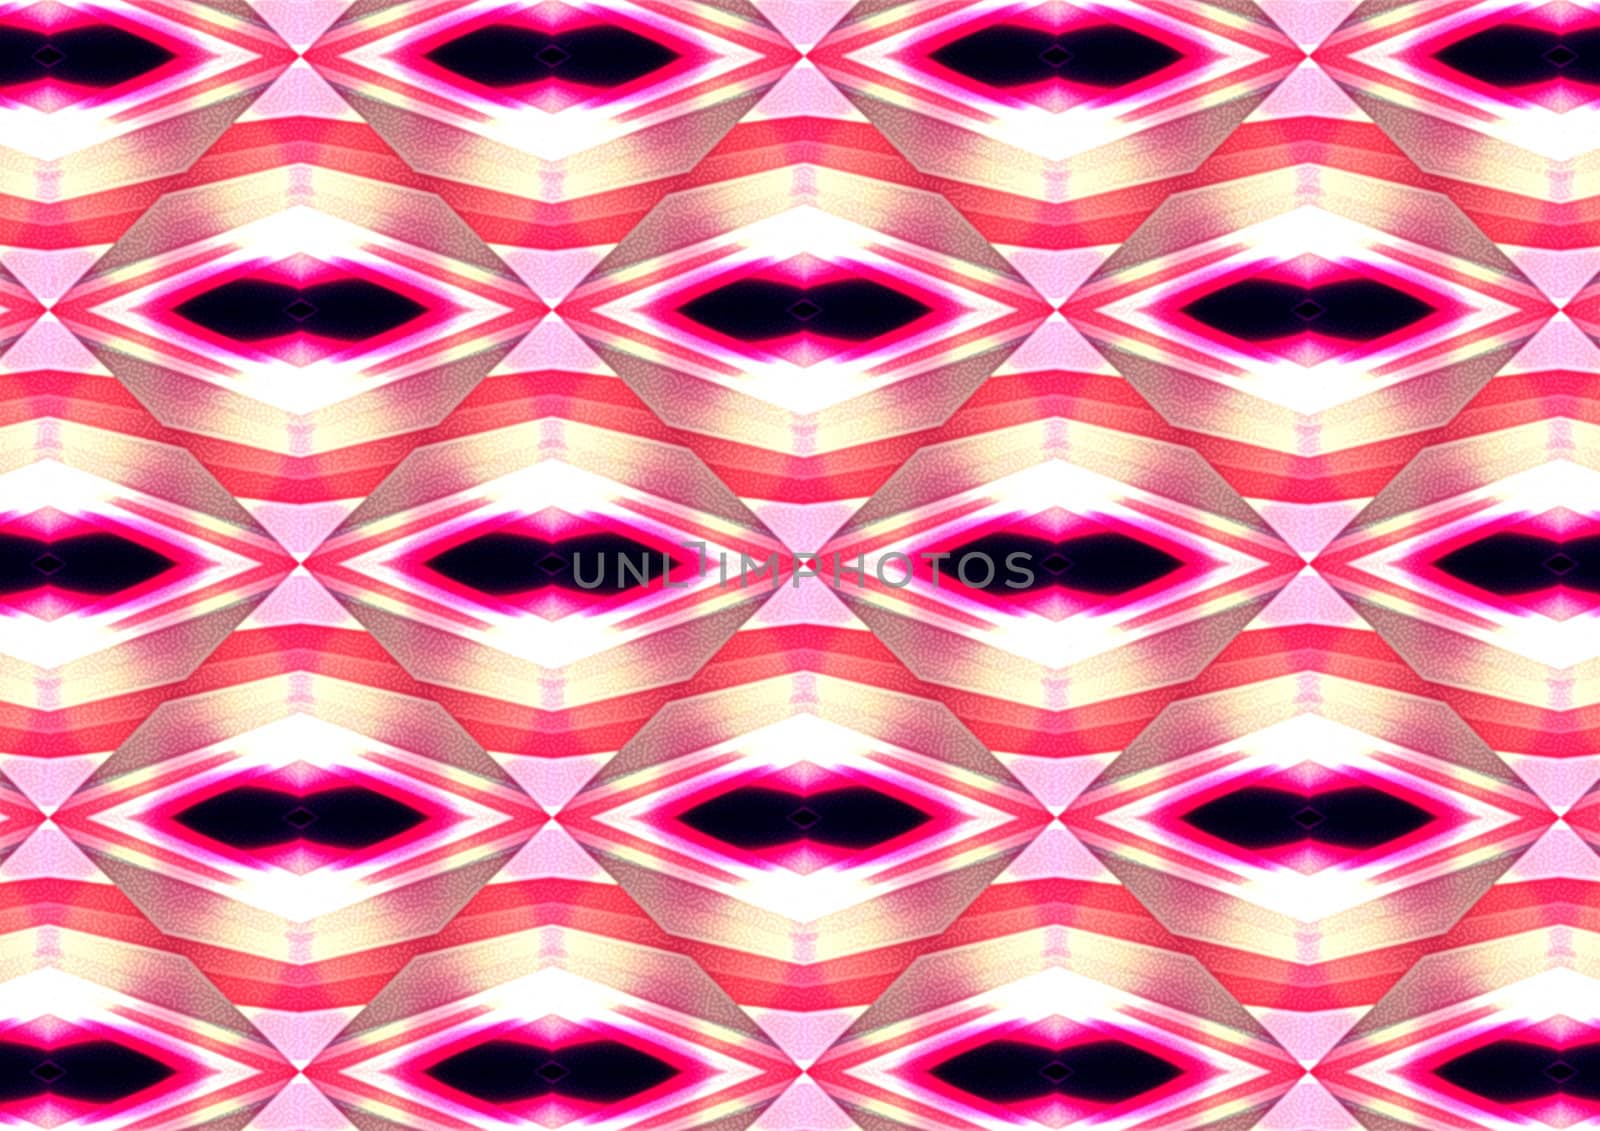 Pink radiant pattern by creativ000